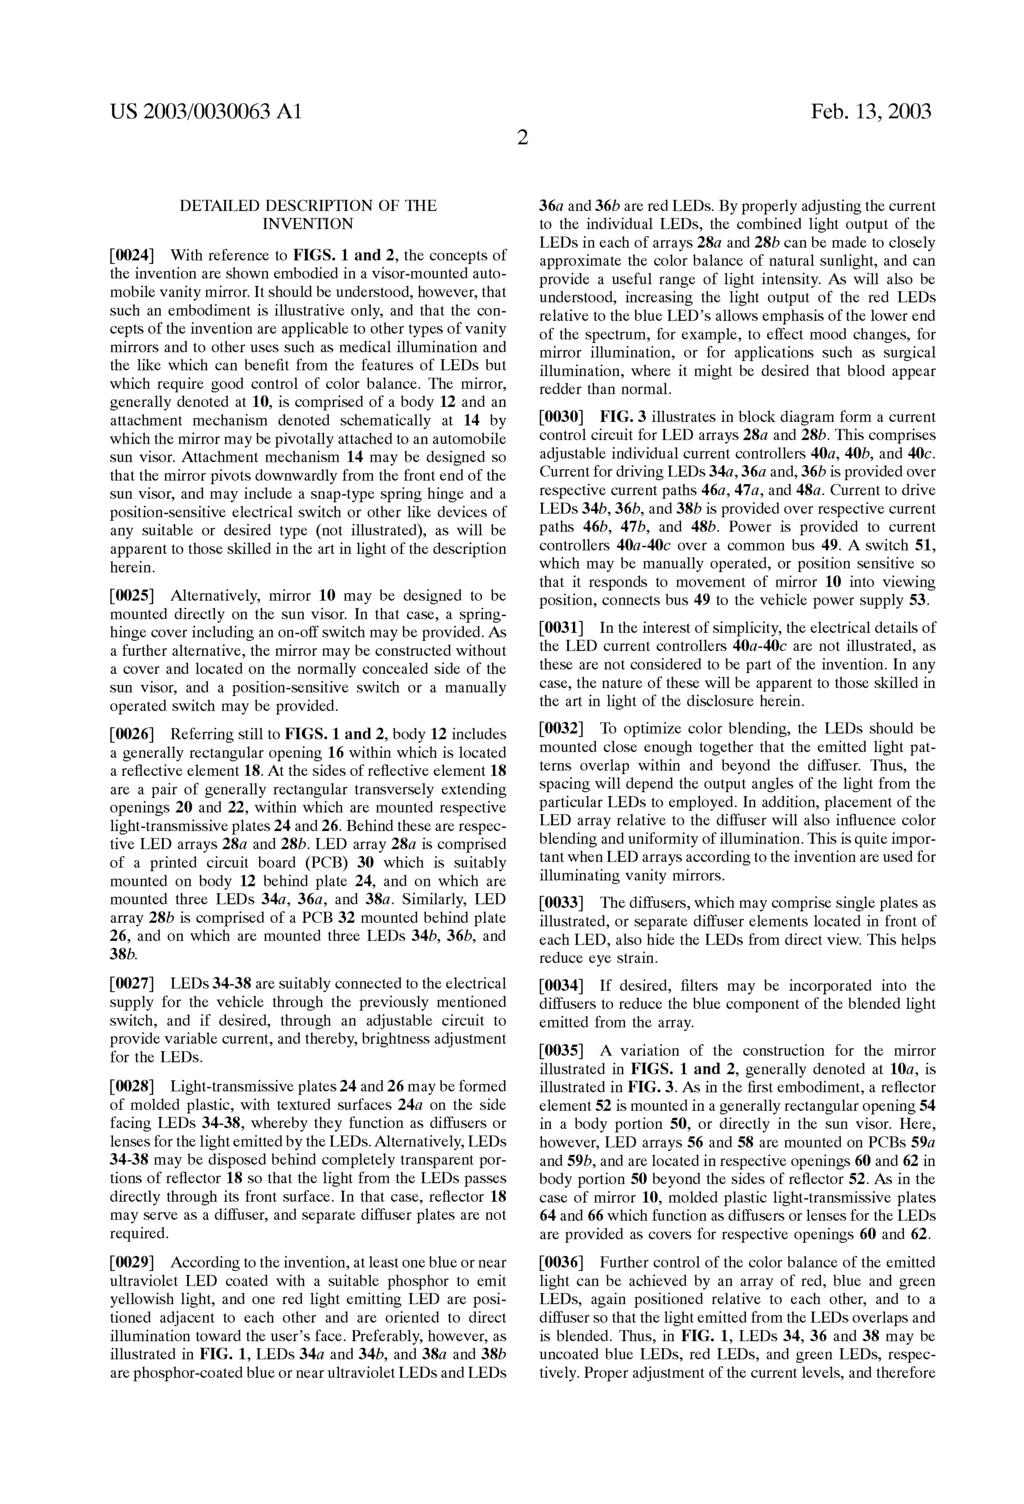 US 2003/0030063 A1 Feb. 13, 2003 DETAILED DESCRIPTION OF THE INVENTION 0024. With reference to FIGS.